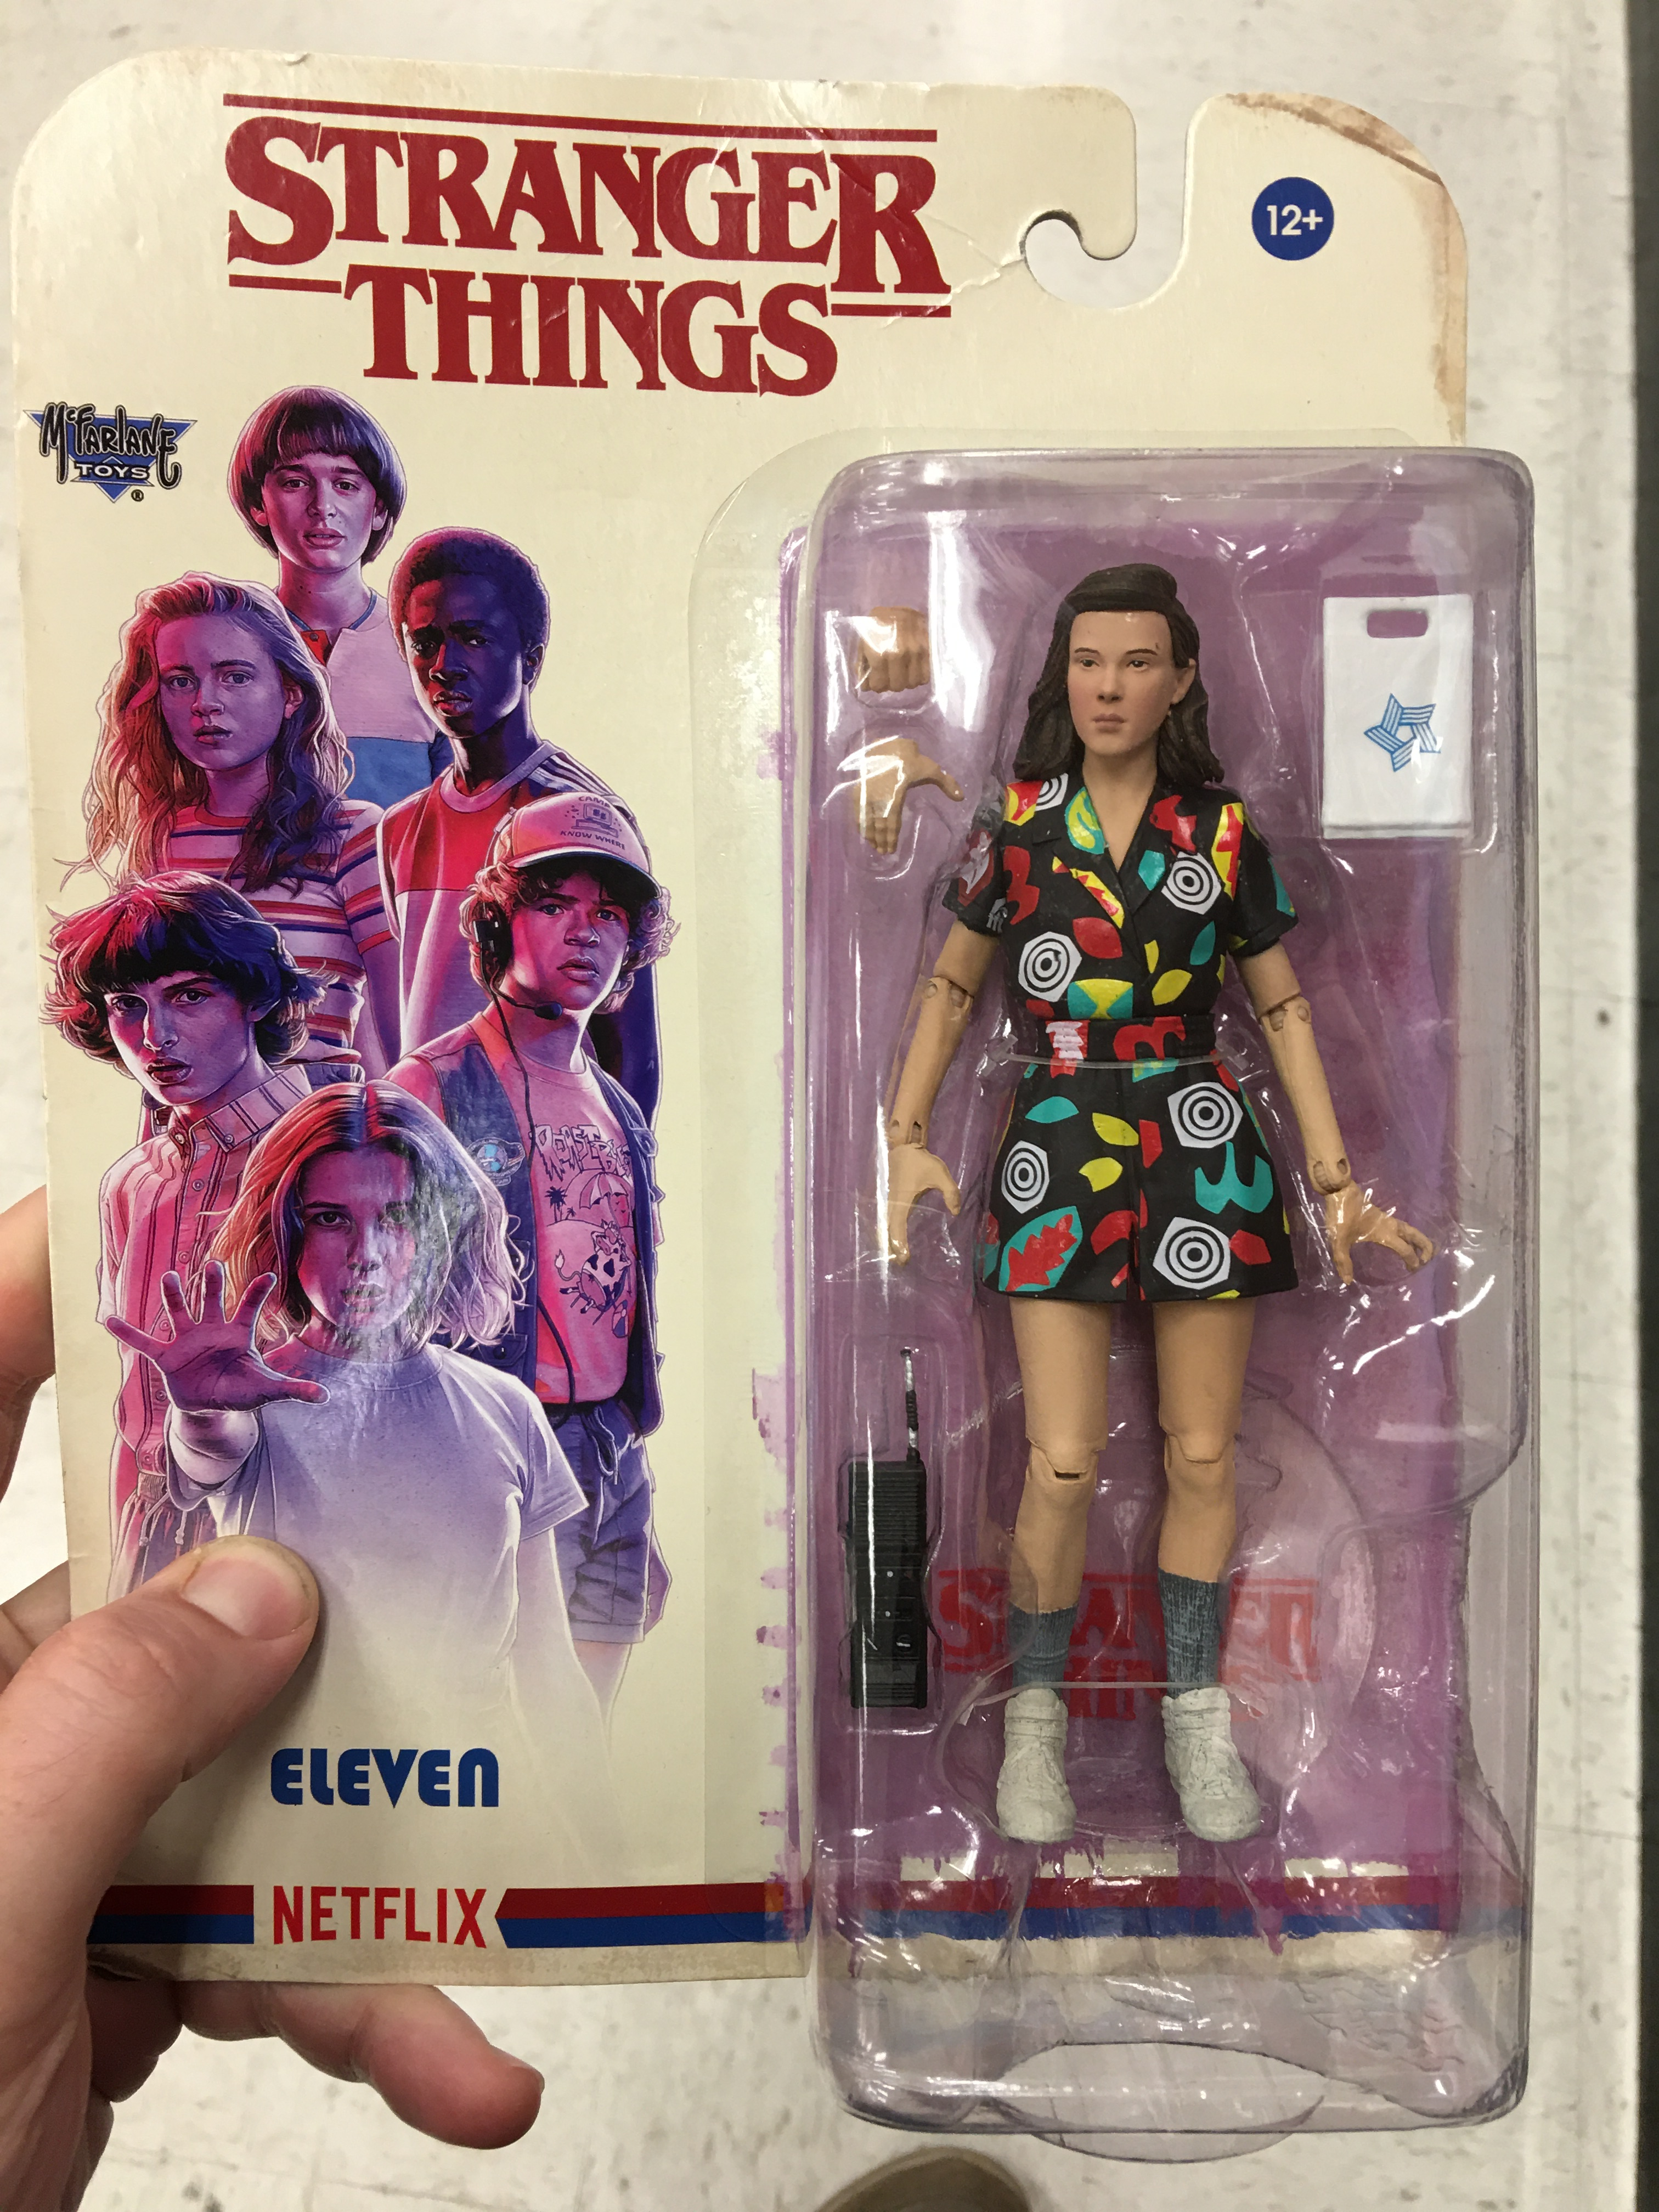 Pack of 2 Stranger Things Figures :Eleven and Chief Hopper